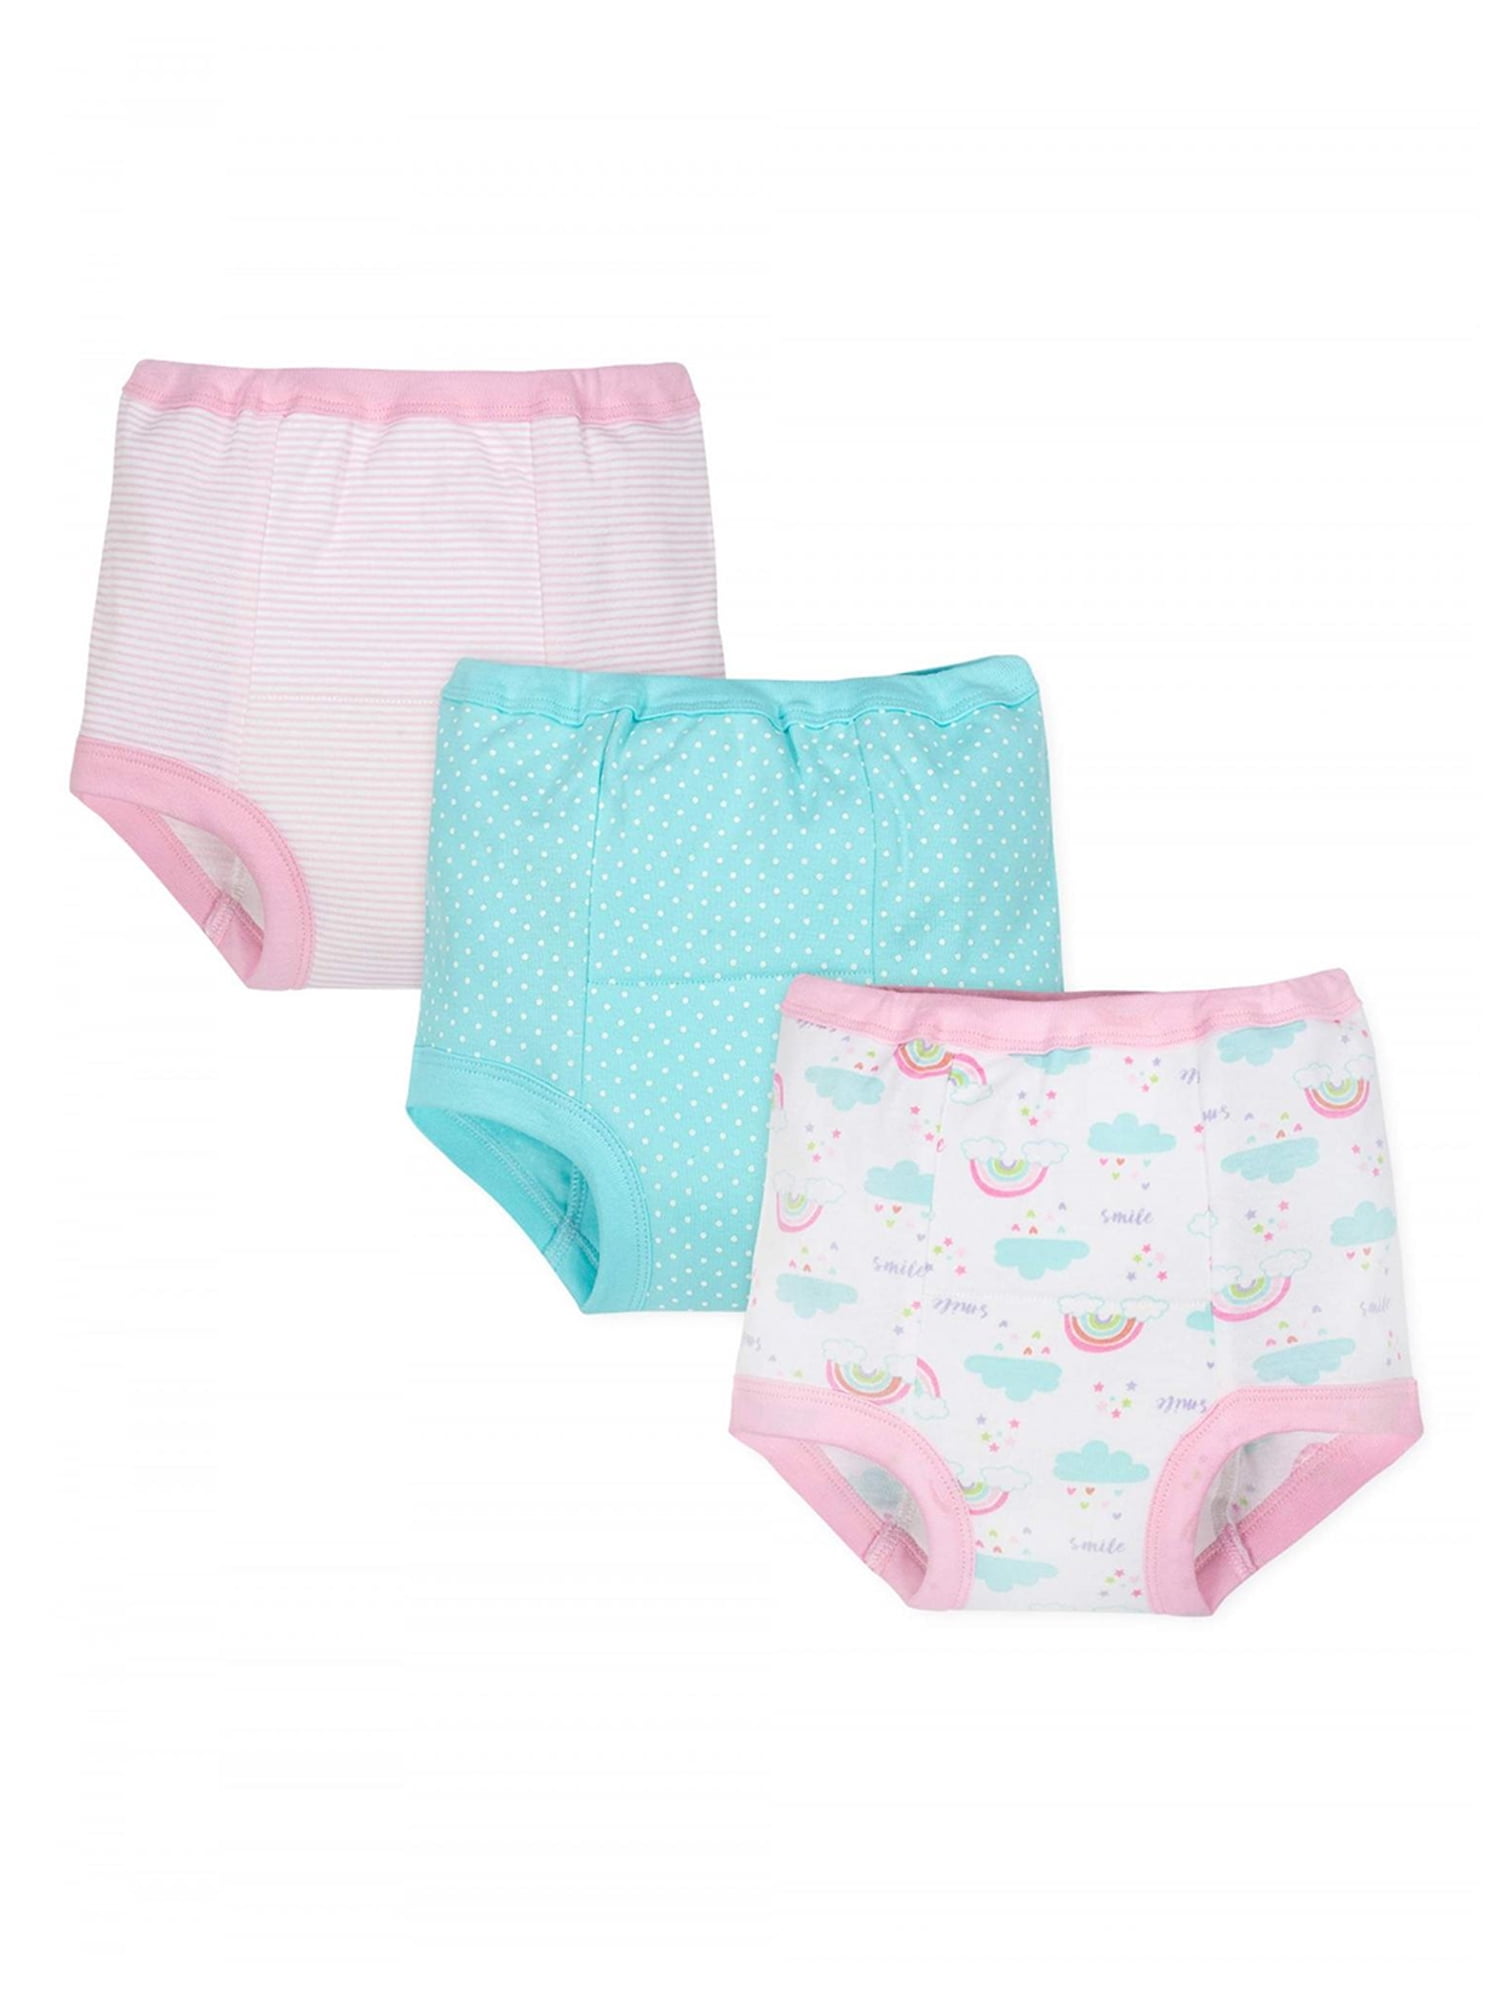 Toddler Girl Panties Around Ankles Images